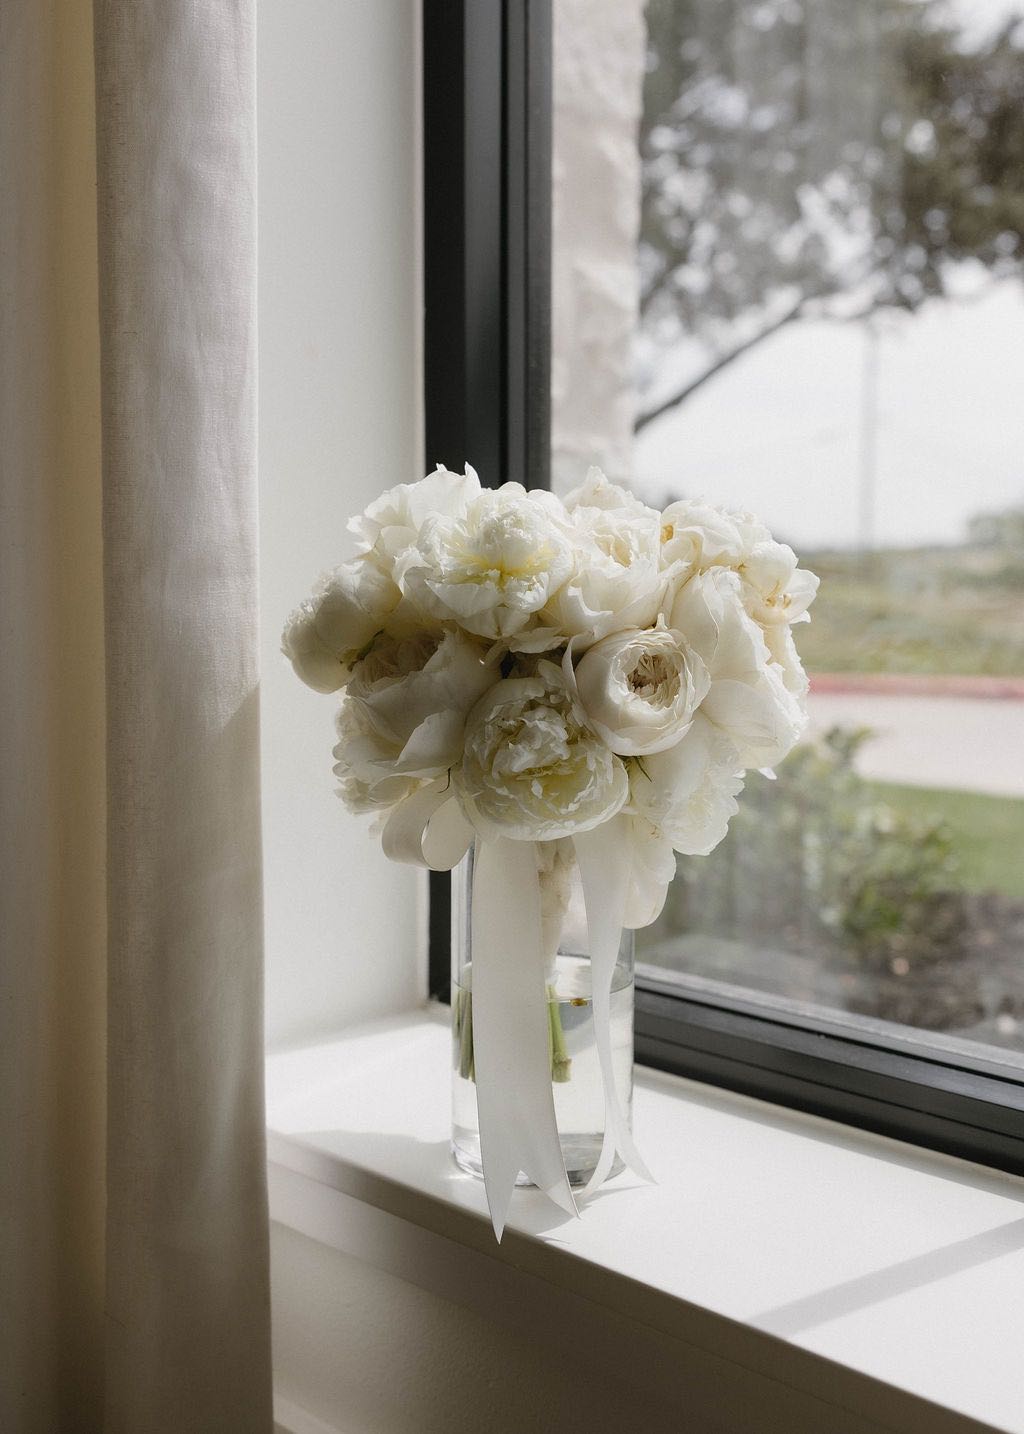 White bridal bouquet with white roses and white peonies, tied with silk ribbon